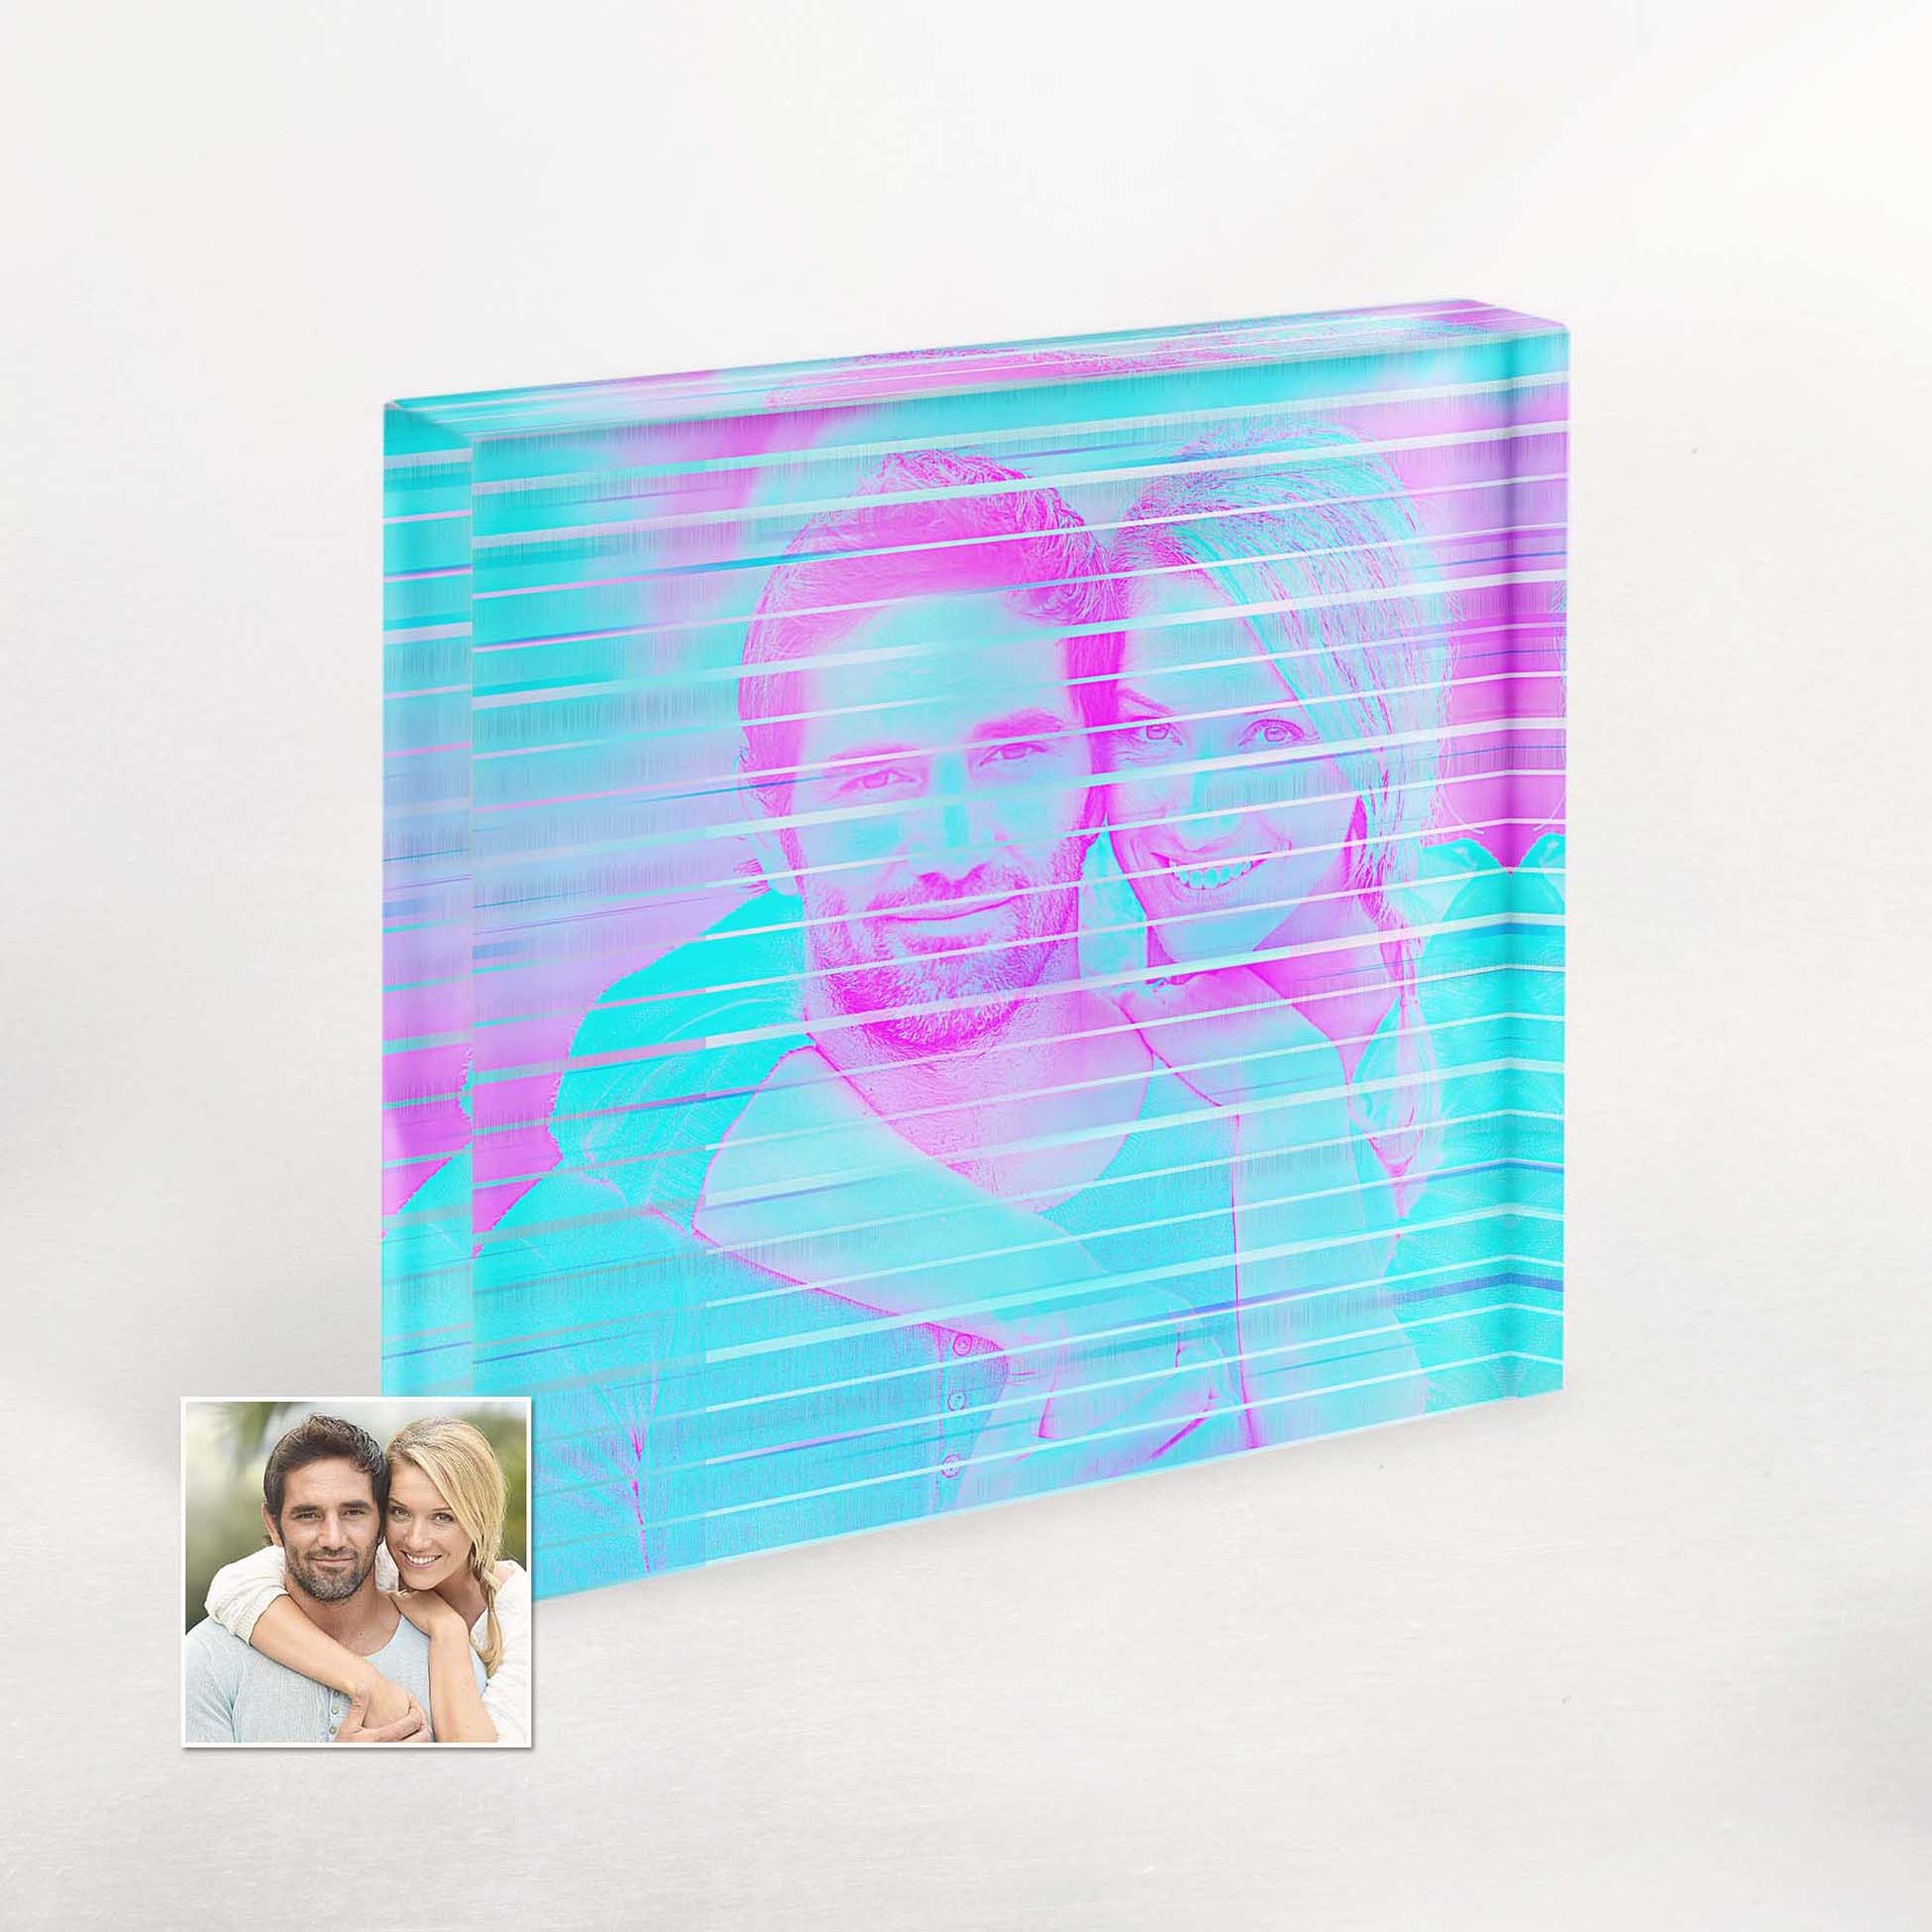 Creative and Modern: Personalised Purple and Blue Signal Acrylic Block Photo. Transform your space with a stylish and trendy gift. The vibrant purple and blue design adds a unique and modern touch to any decor.